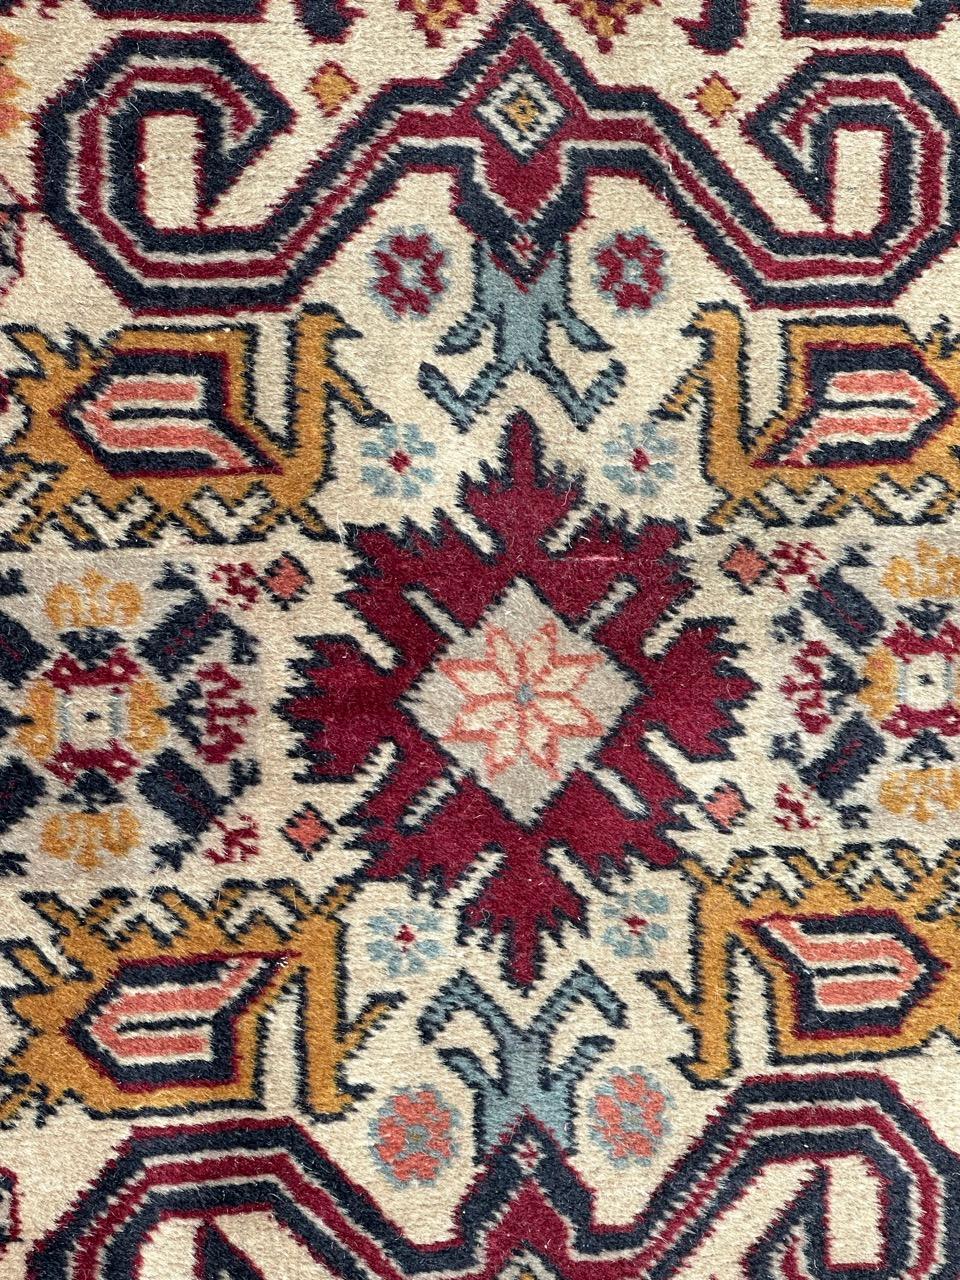 Nice mid century Azerbaïdjan rug with beautiful design of Caucasian shirvan perepedil rugs and nice colors, entirely hand knotted with wool velvet on cotton foundation.

✨✨✨
